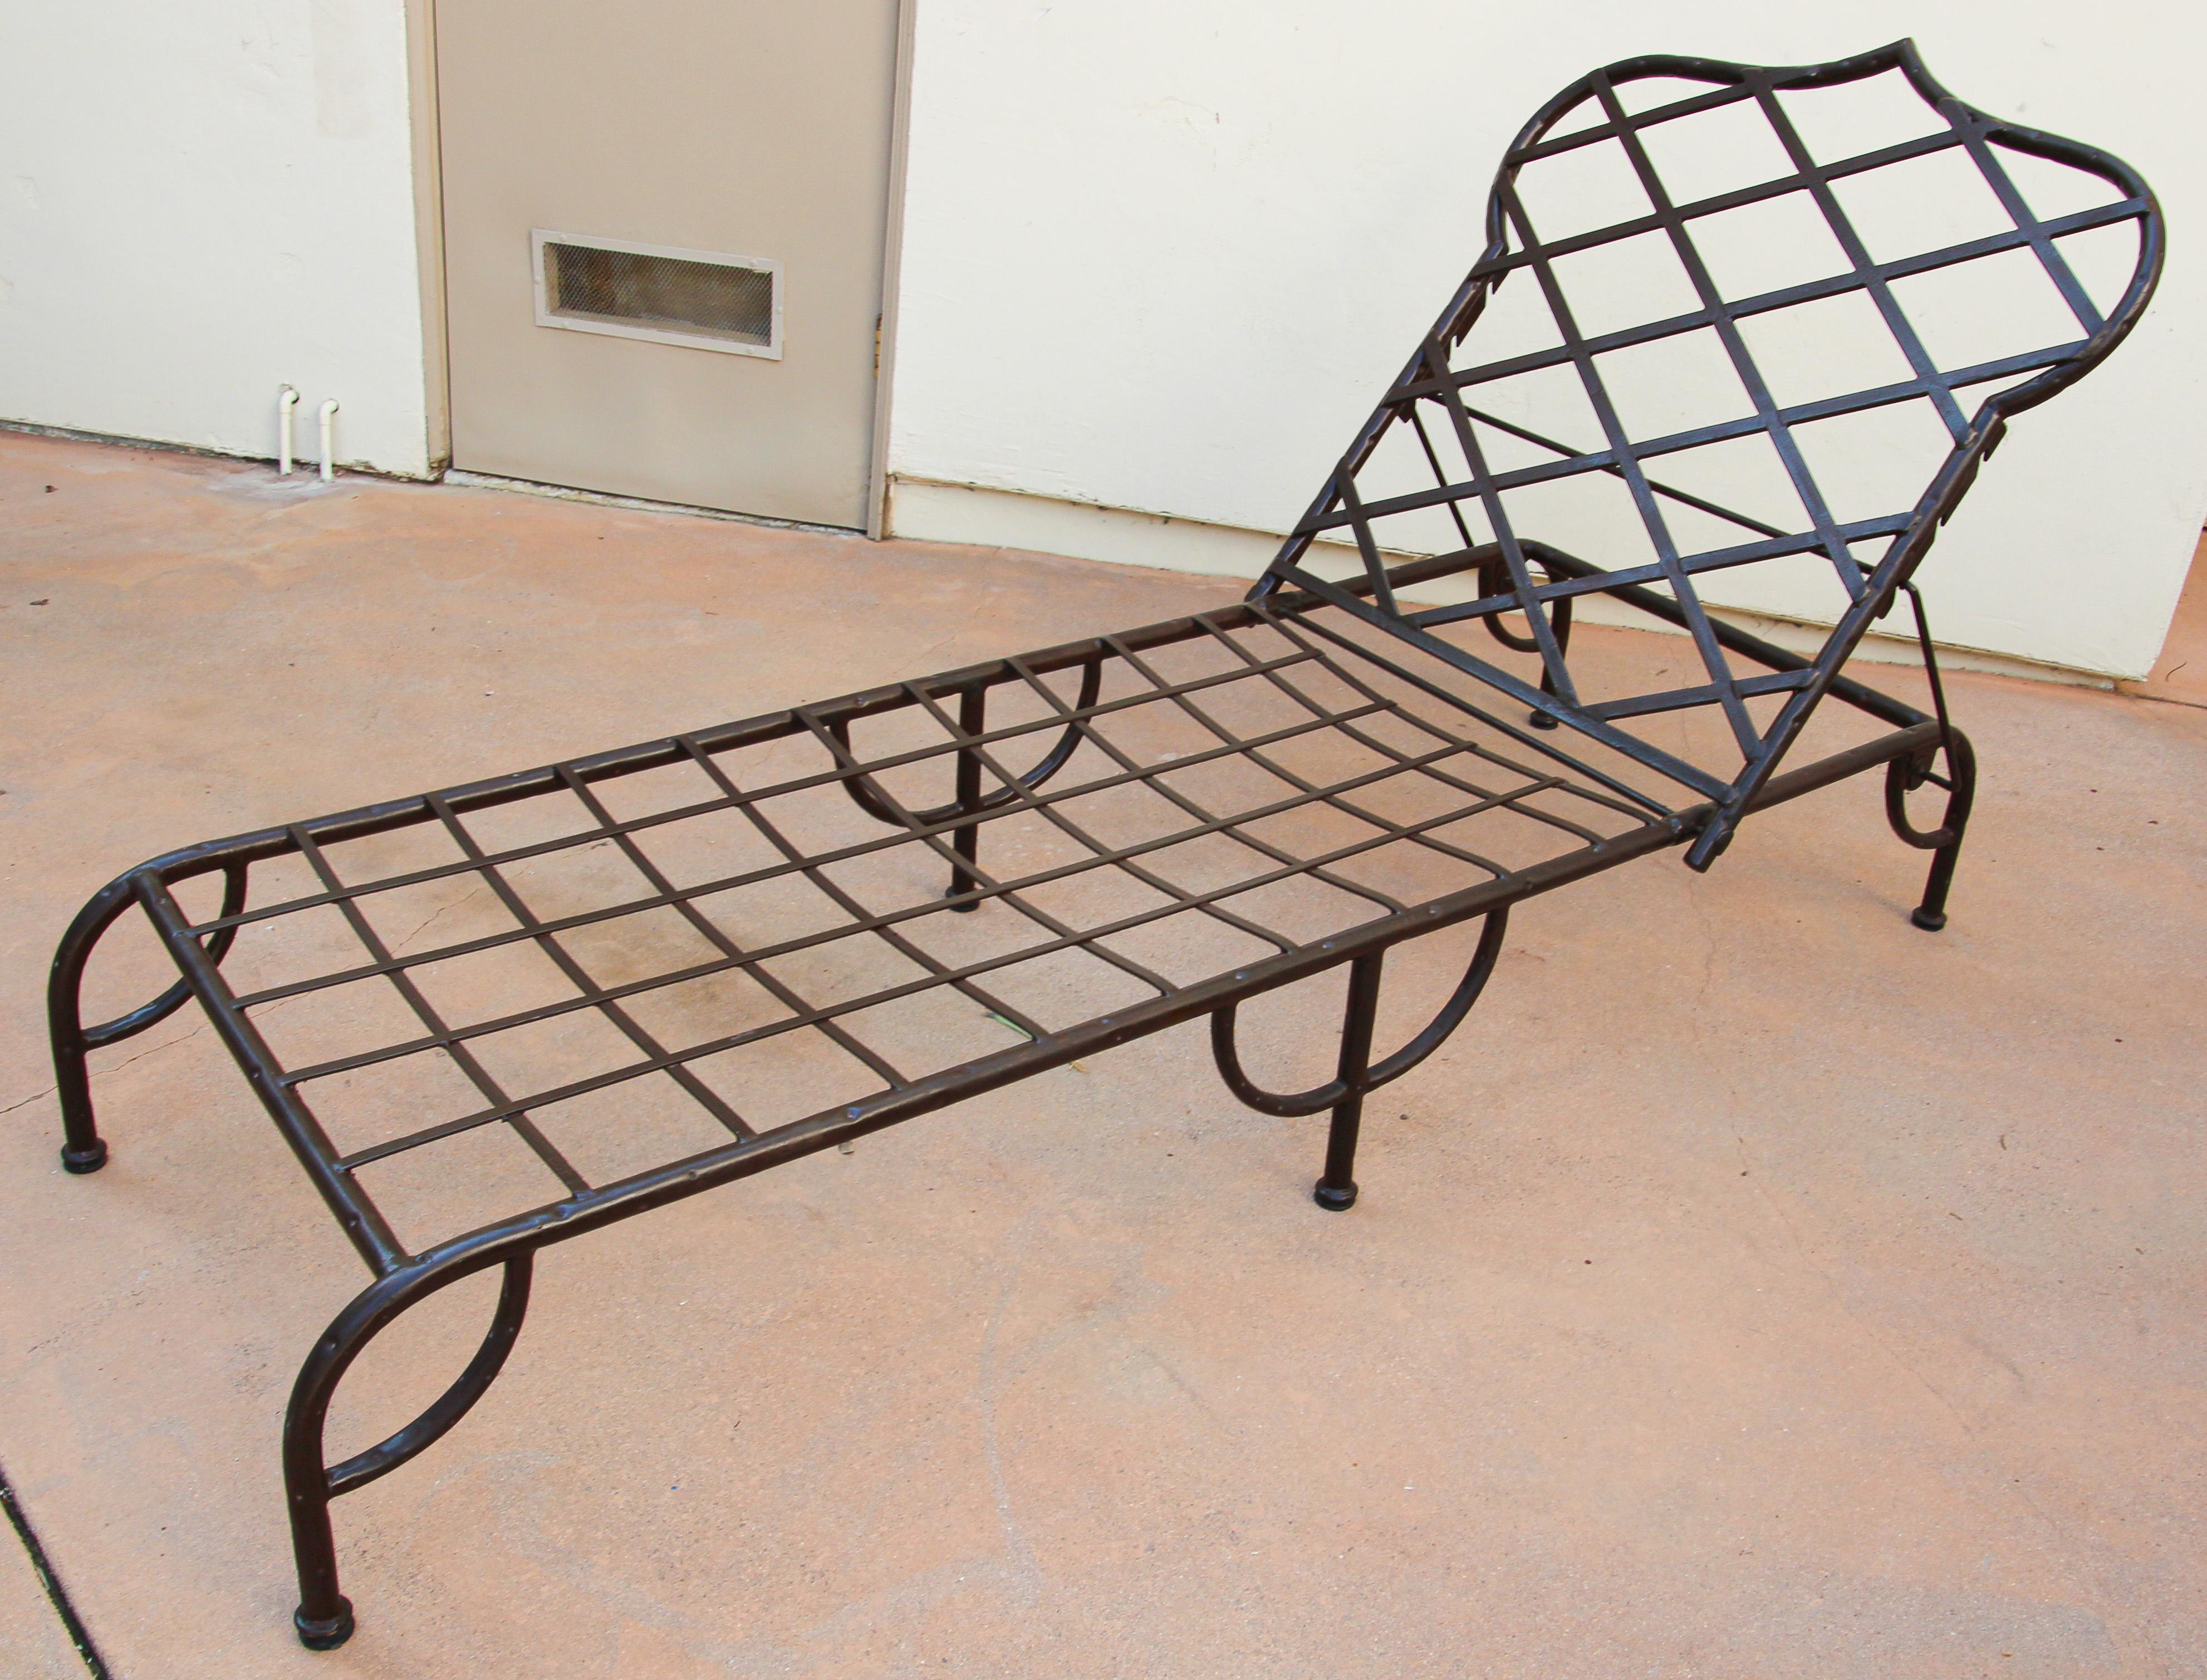 Custom made outdoor metal lounge pool chair powder coated with rust iron color.
Vintage architectural wrought iron chaise lounge with unusual Moorish arch backrest design, with three positions for the back position backrest. 
Original, clean